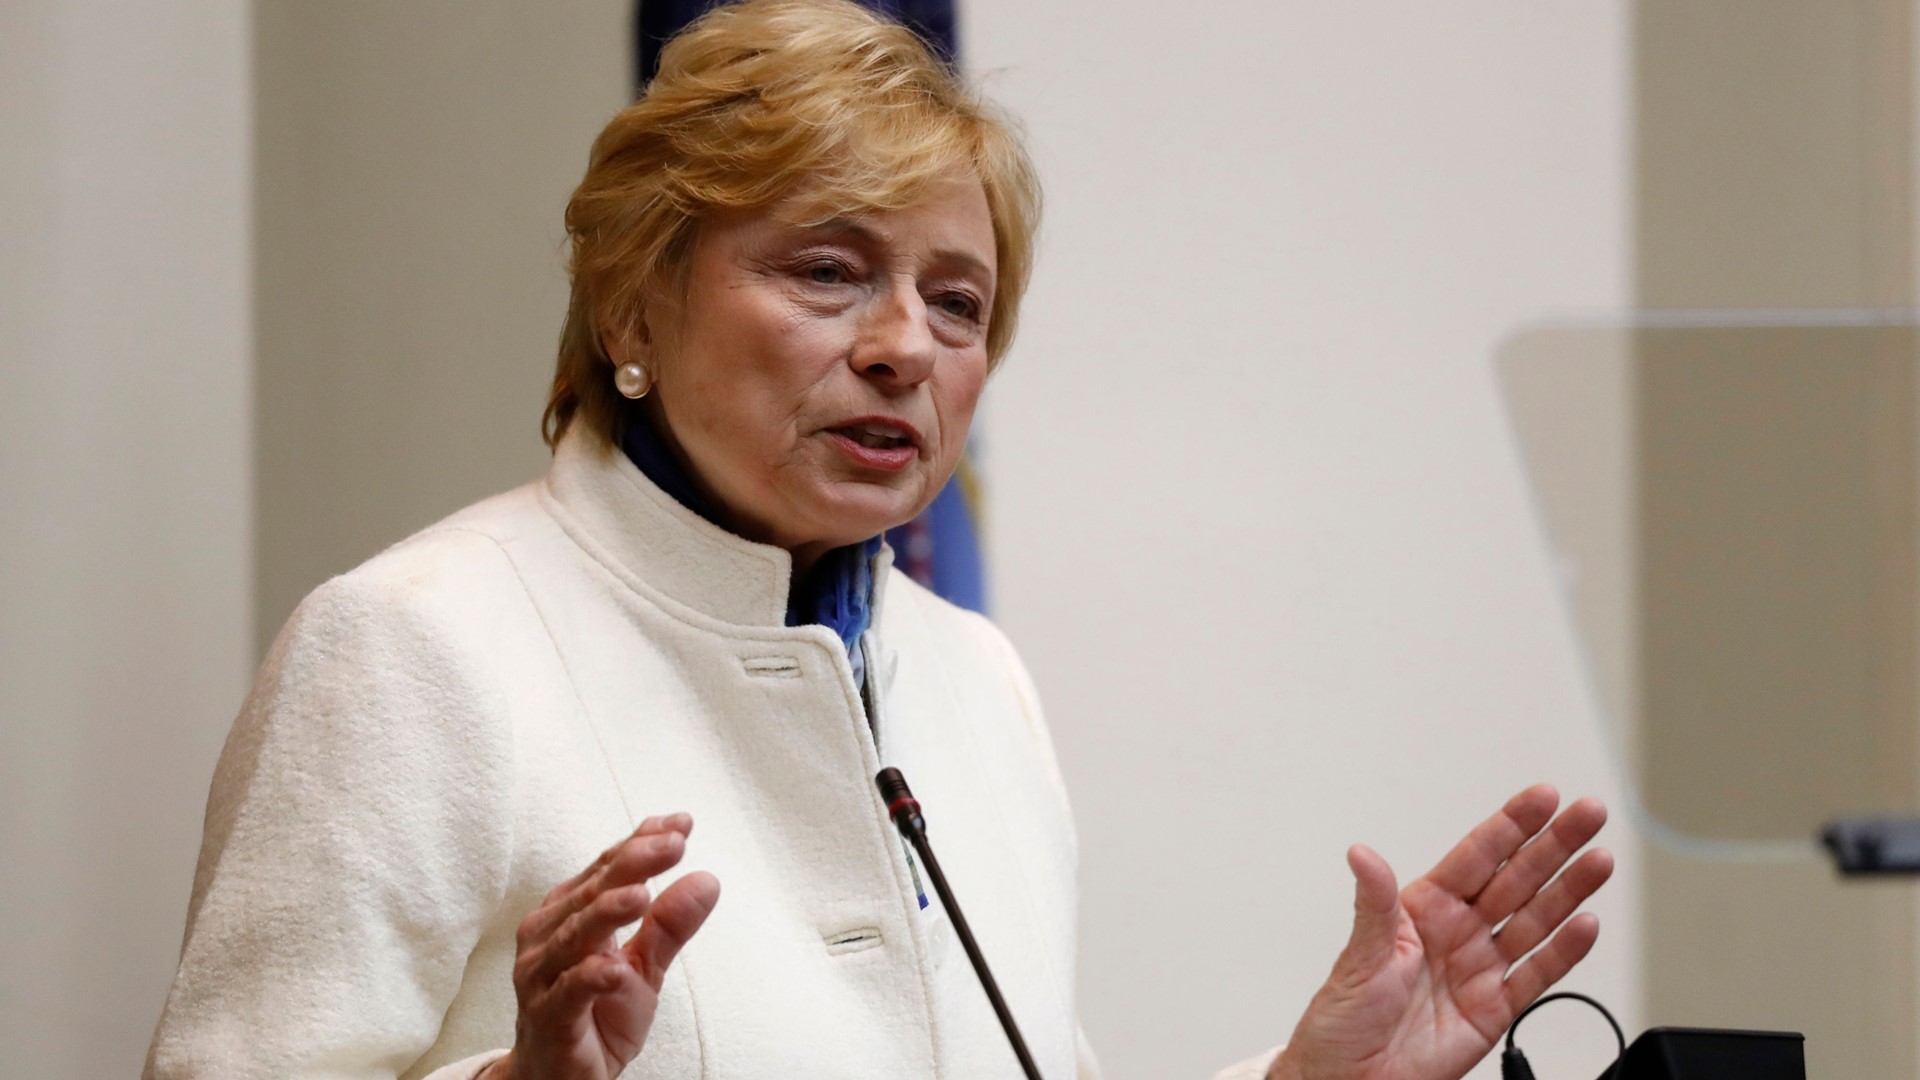 Governor Janet Mills will make history today as the first sitting Maine governor to address the United Nations.